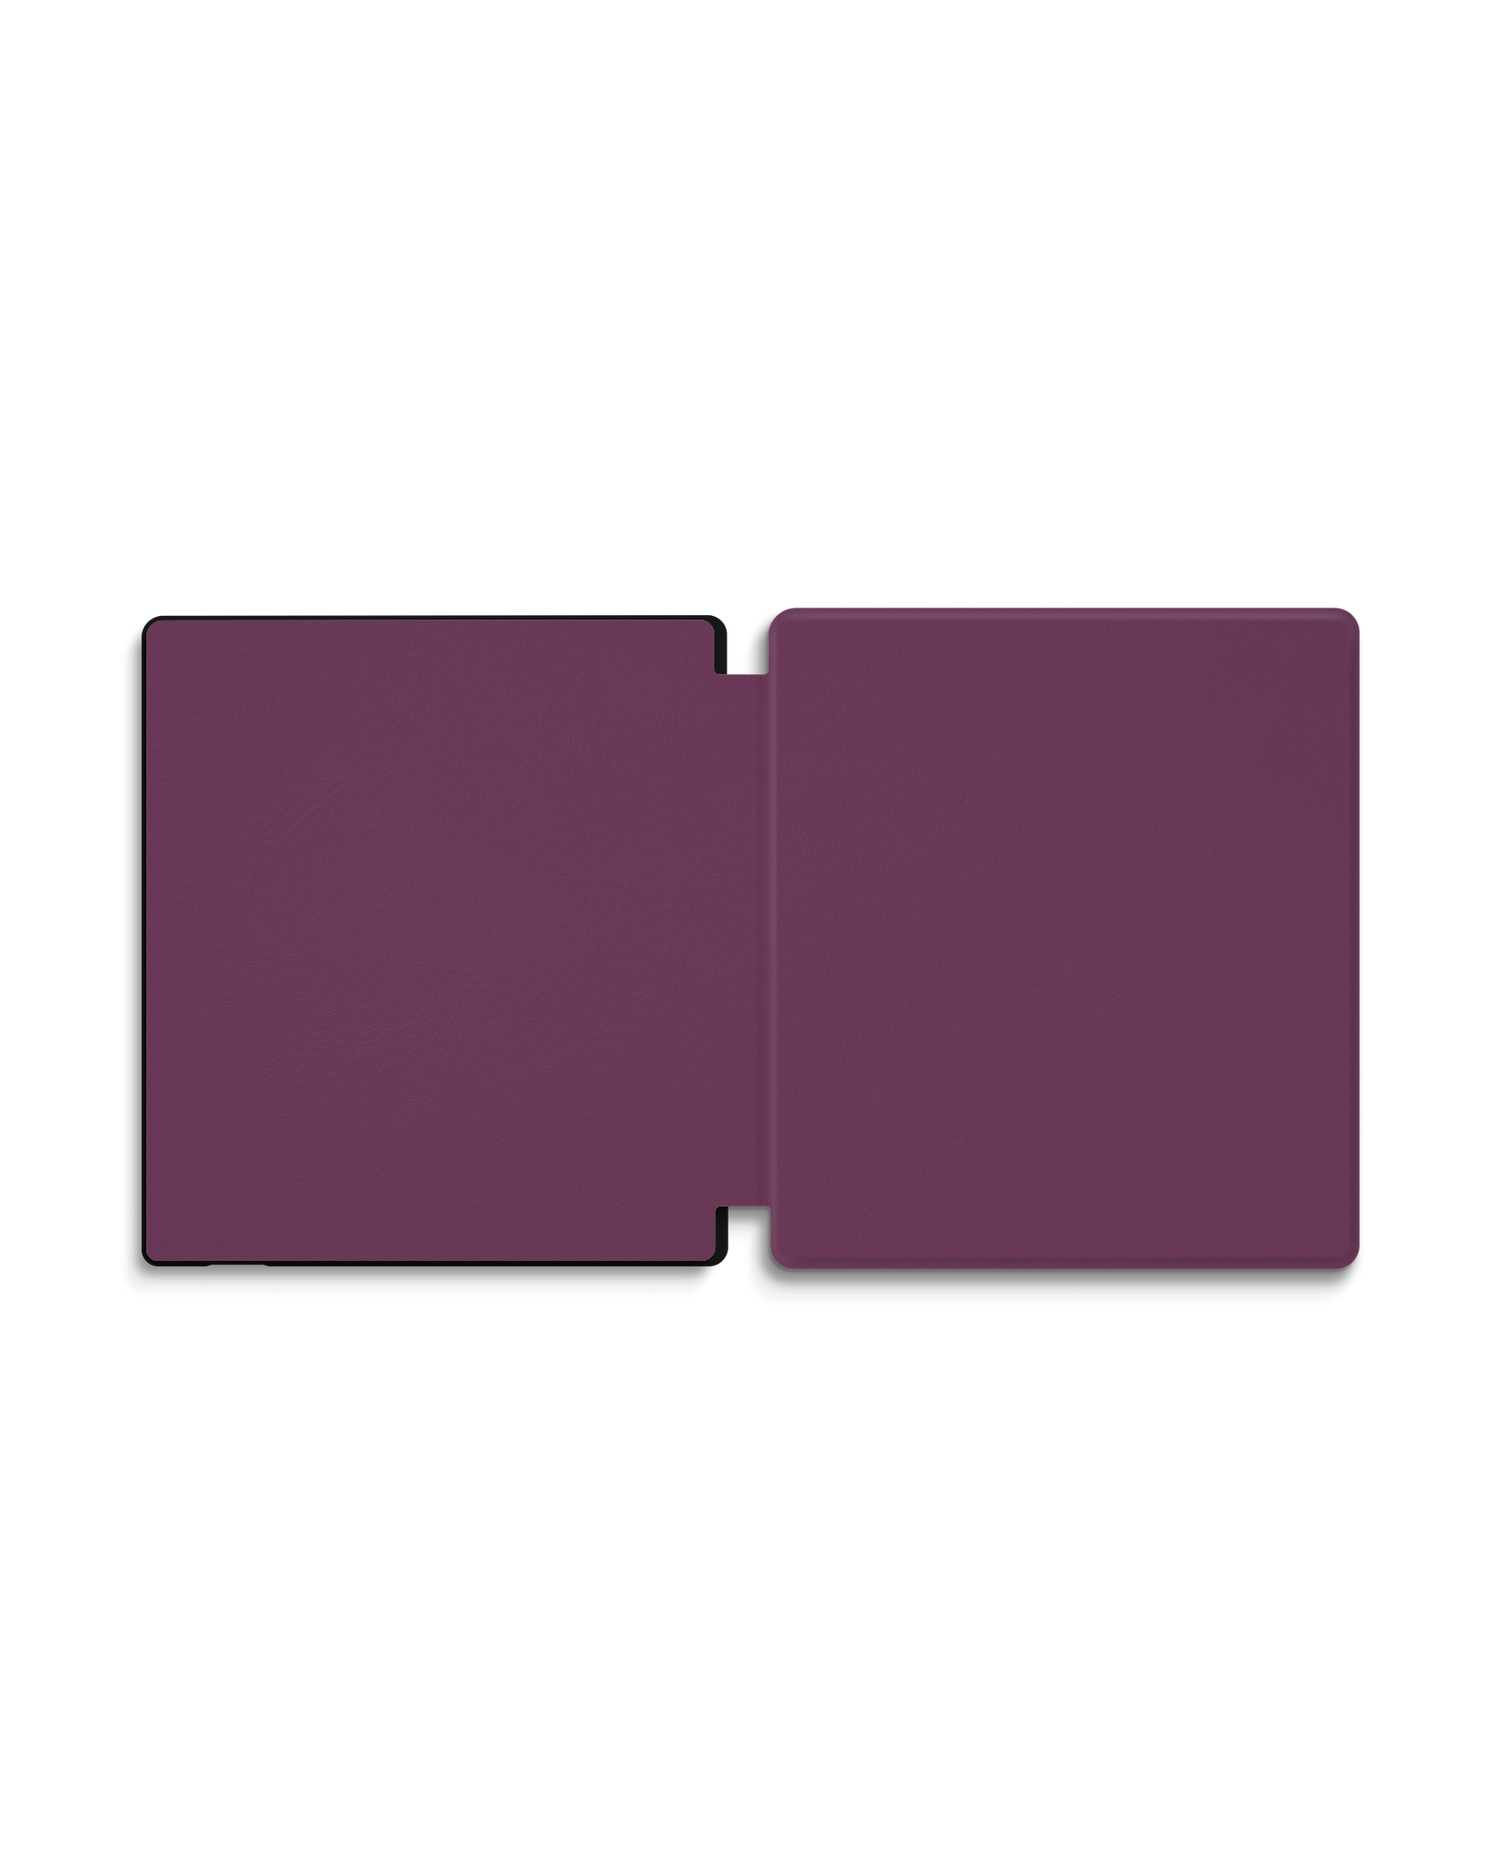 PLUM eReader Smart Case for Amazon Kindle Oasis: Opened exterior view